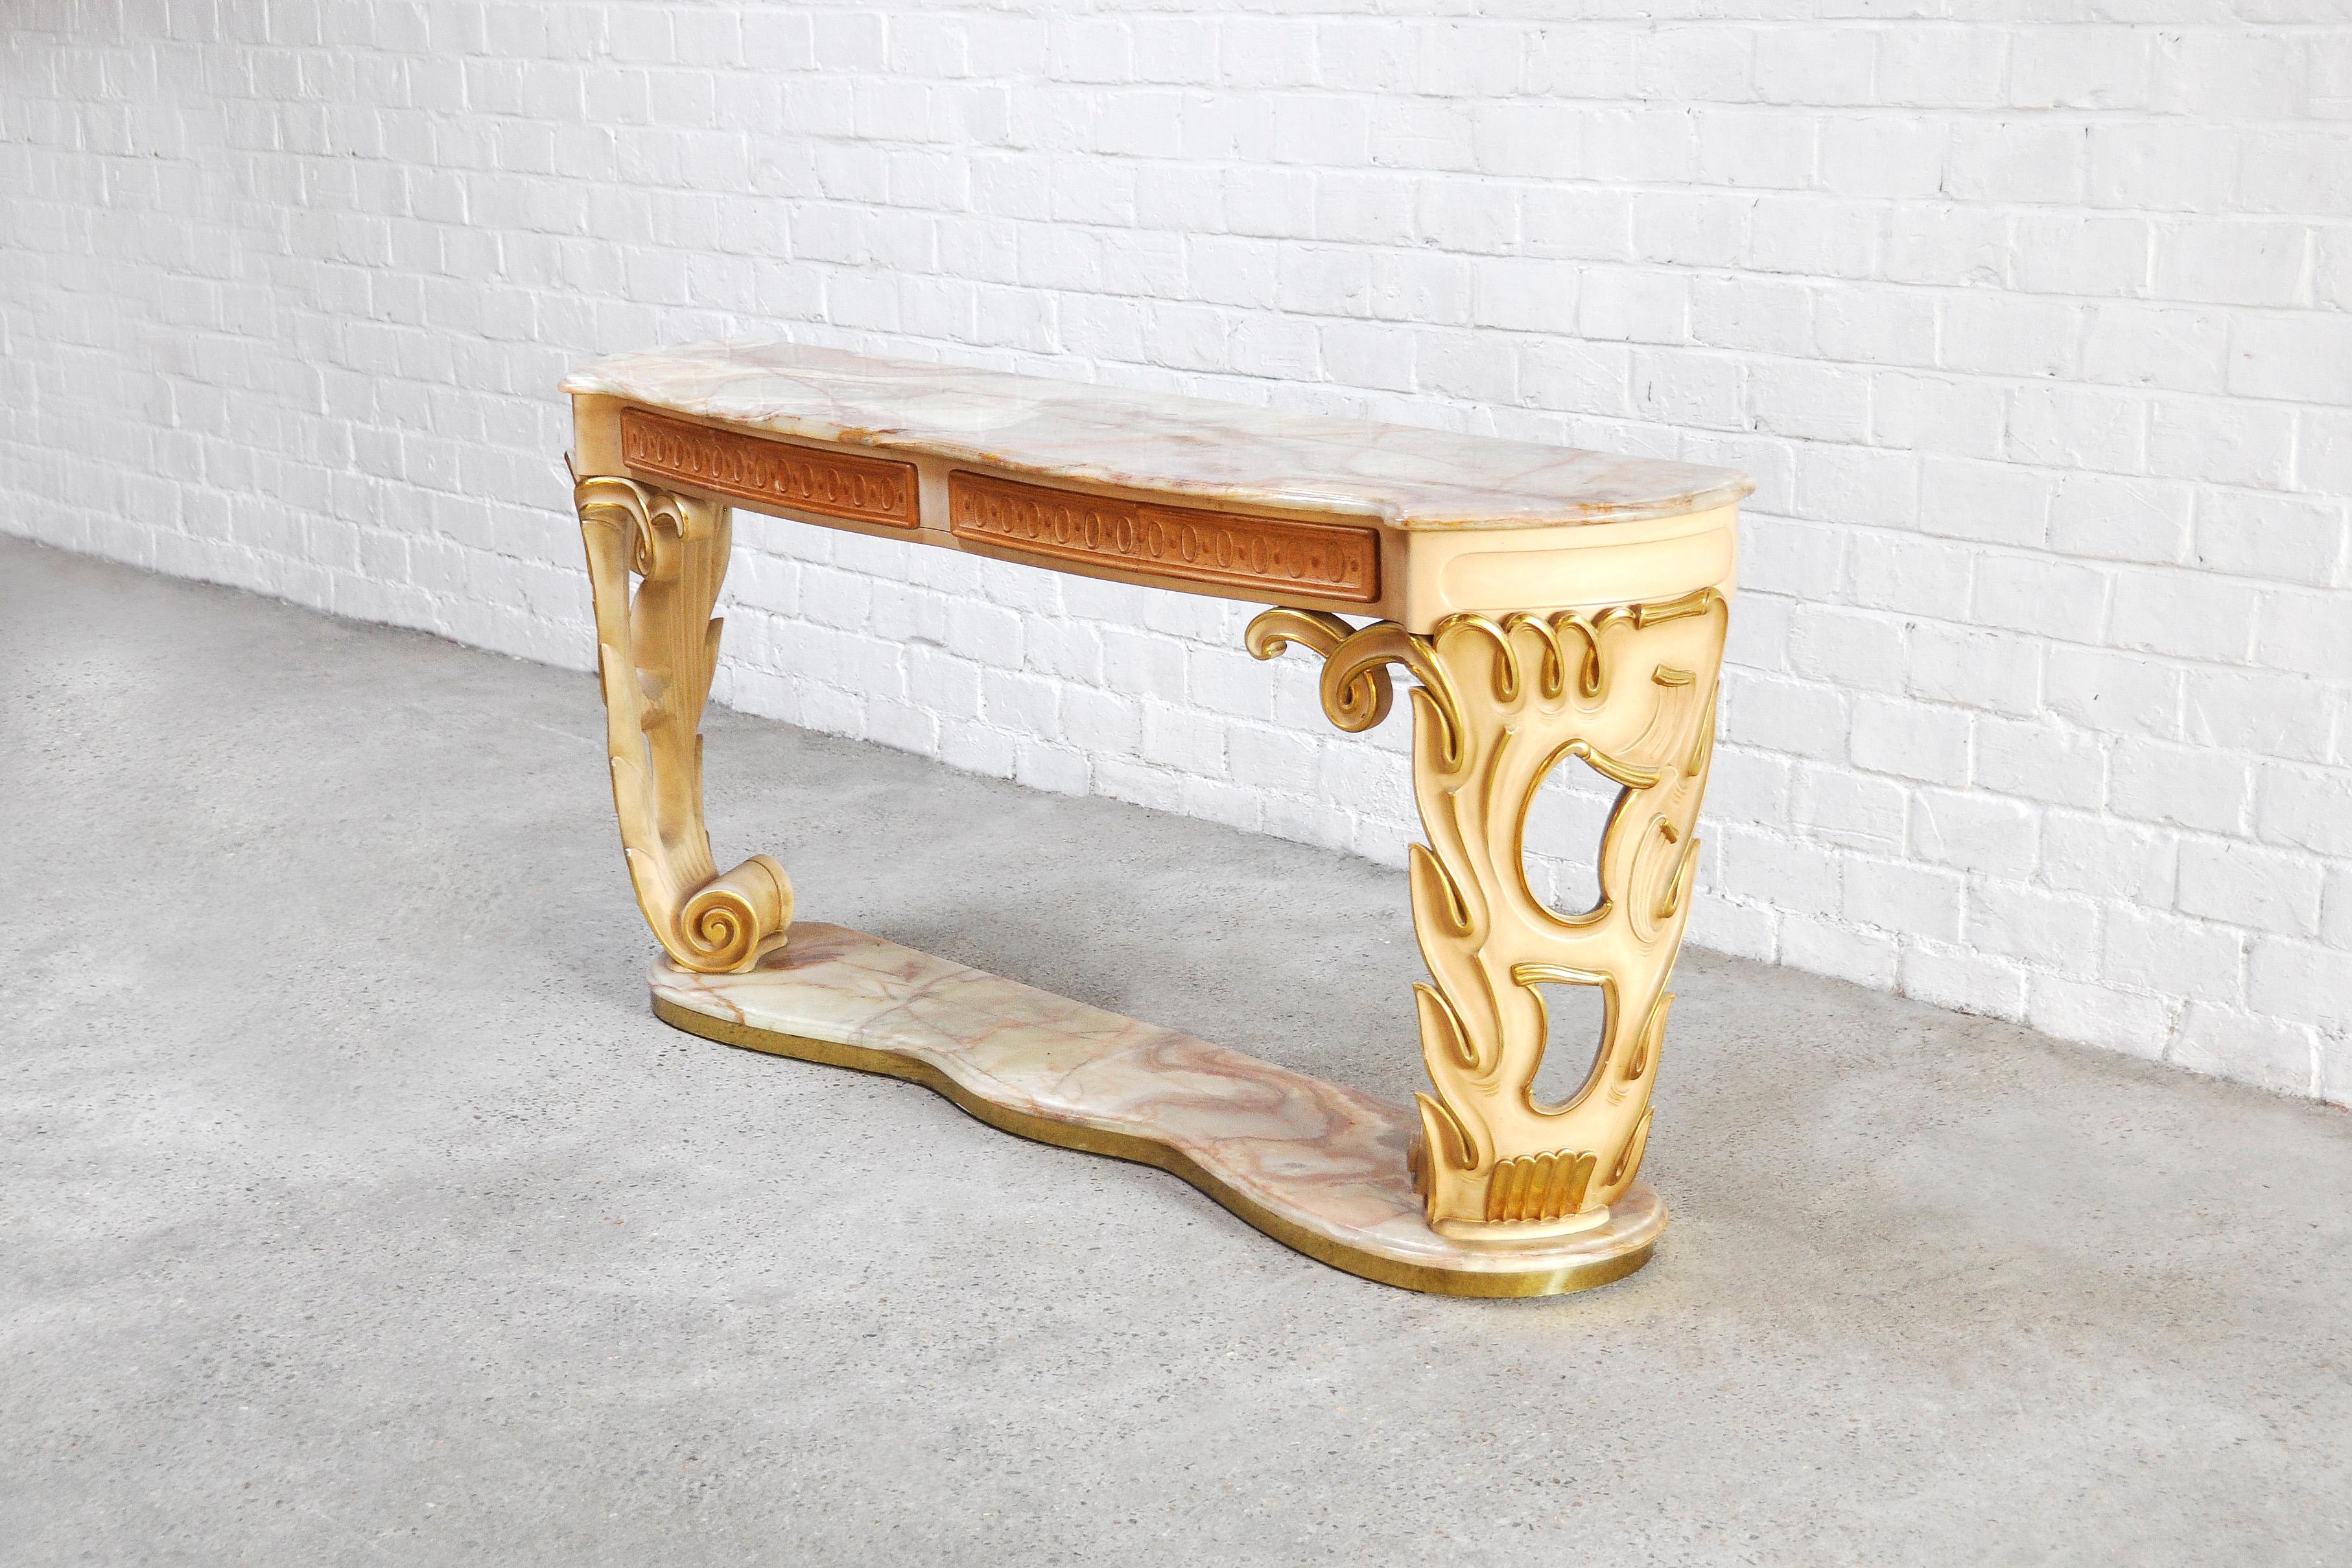 Italian Carved & Gilded Wood Console with Onyx Top, 1940s For Sale 1